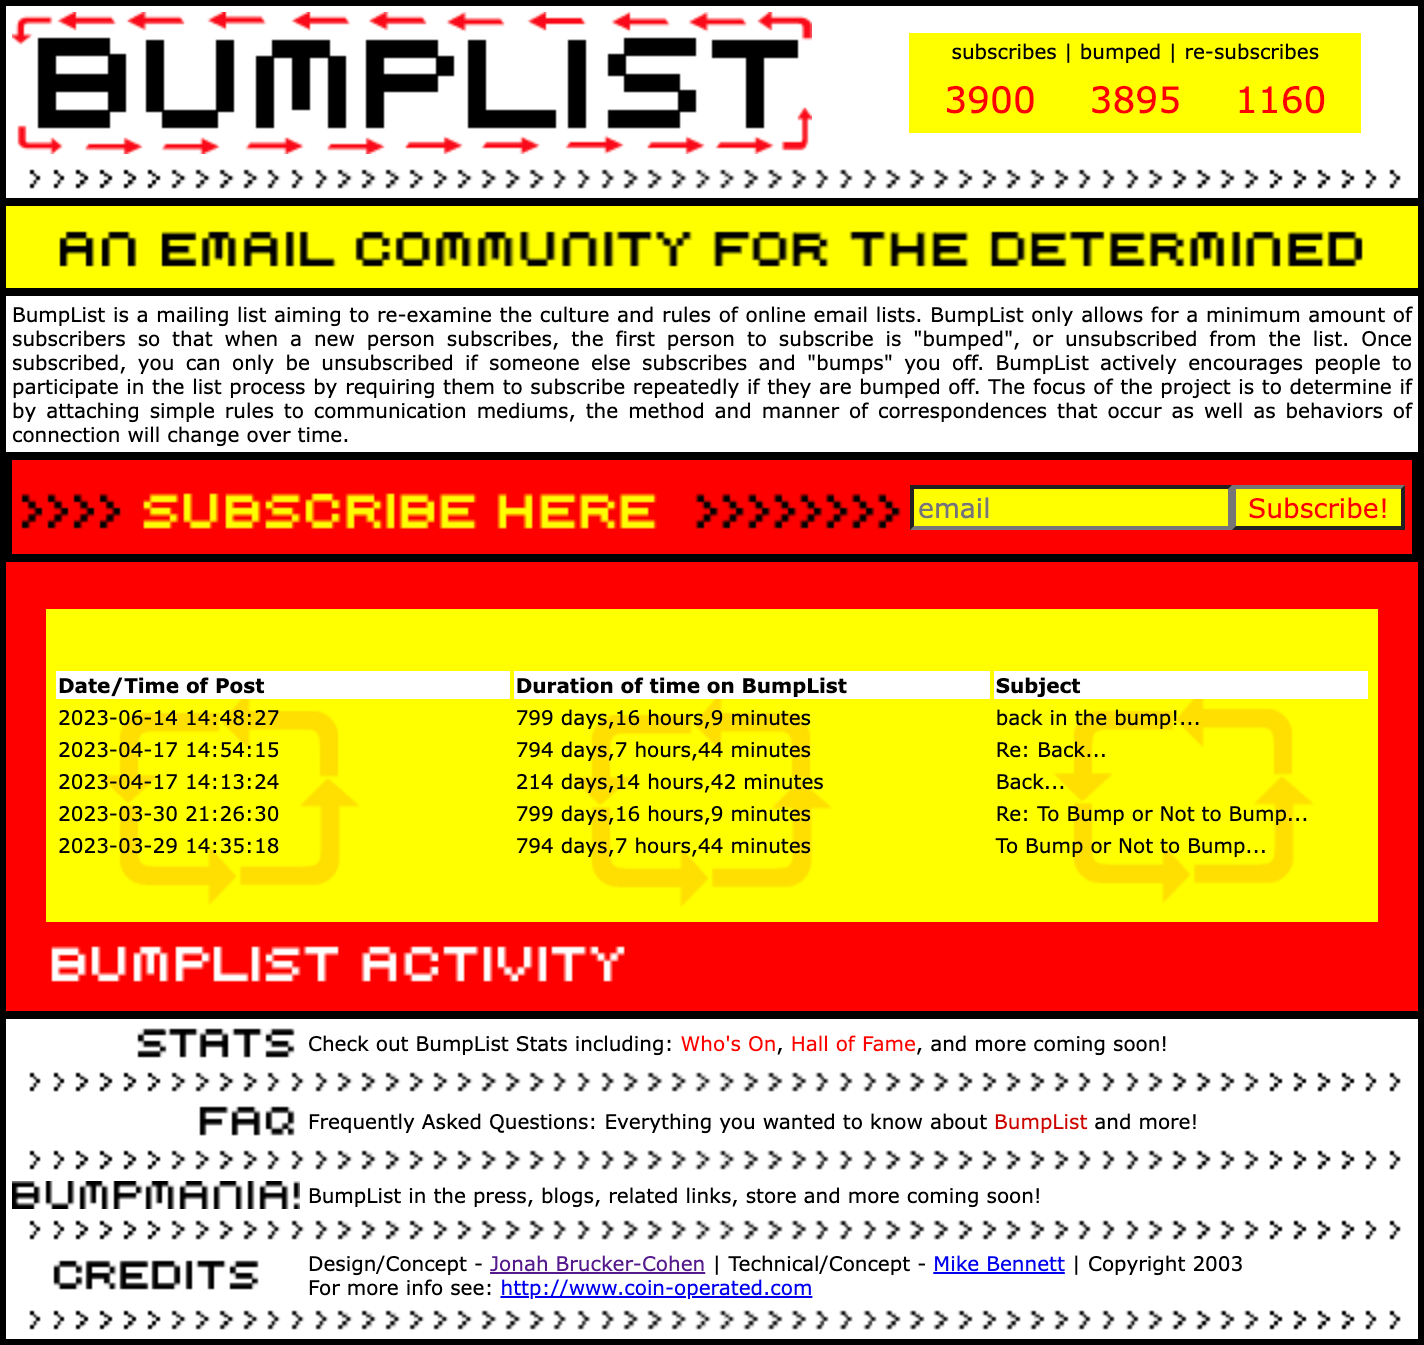 Mostly text, with the title "BUMPLIST", subtitle "AN EMAIL COMMUNITY FOR THE DETERMINED", and an explanation of the project in a smaller font below with lots of red and yellow.